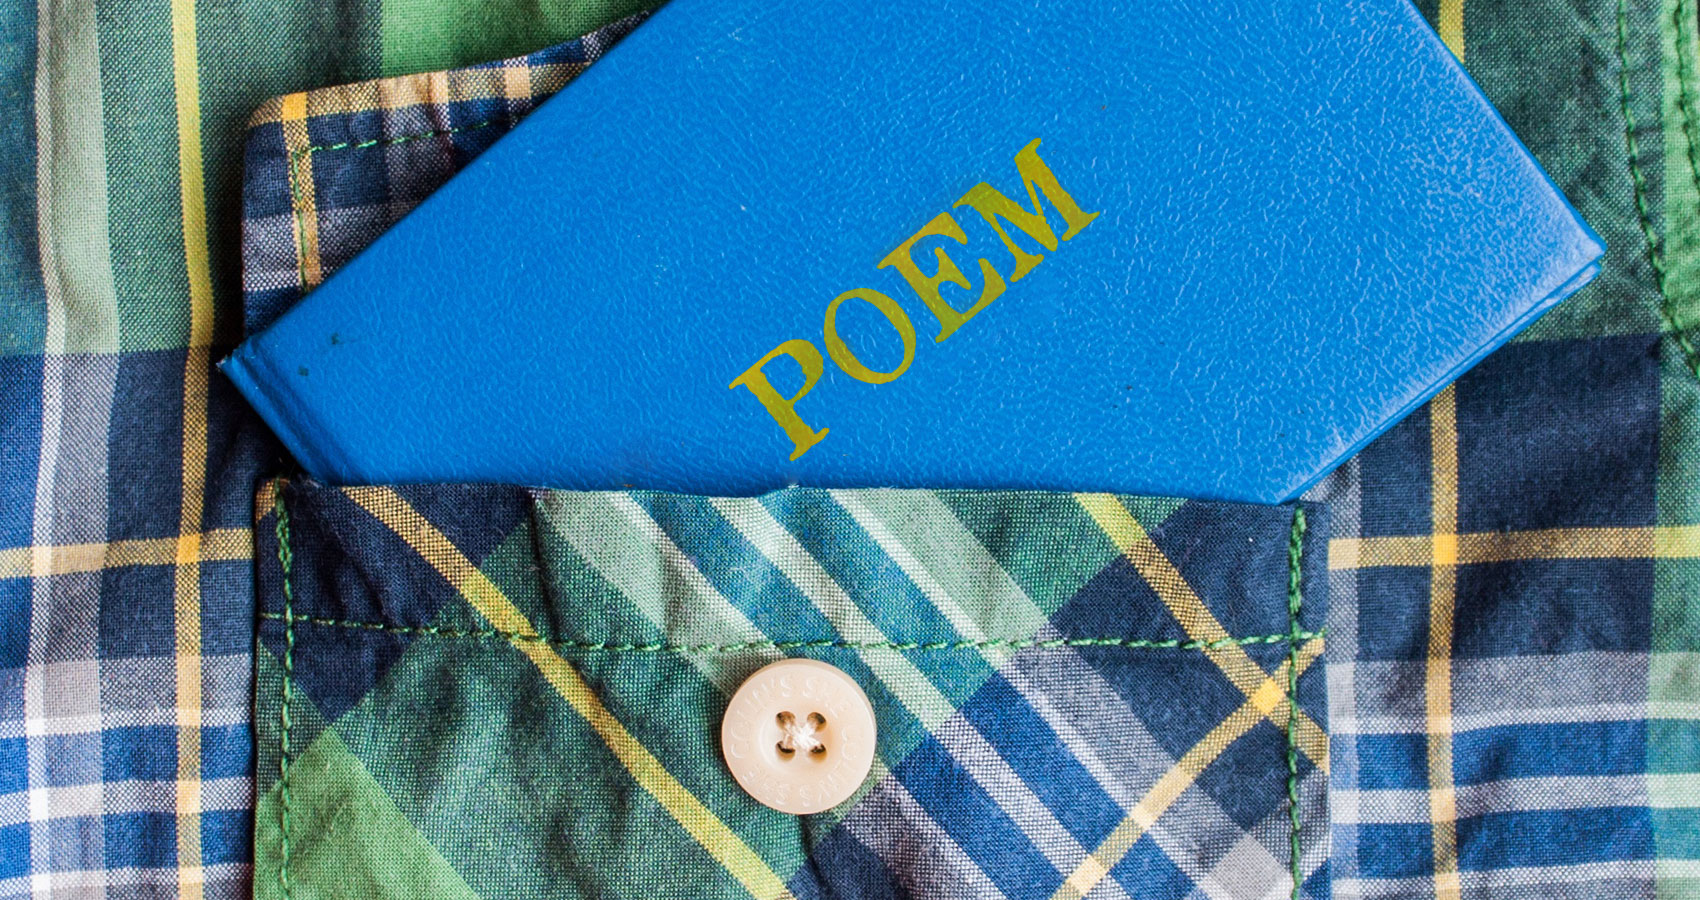 Poem In My Shirt Pocket, poetry written by Mark Tulin at Spillwords.com